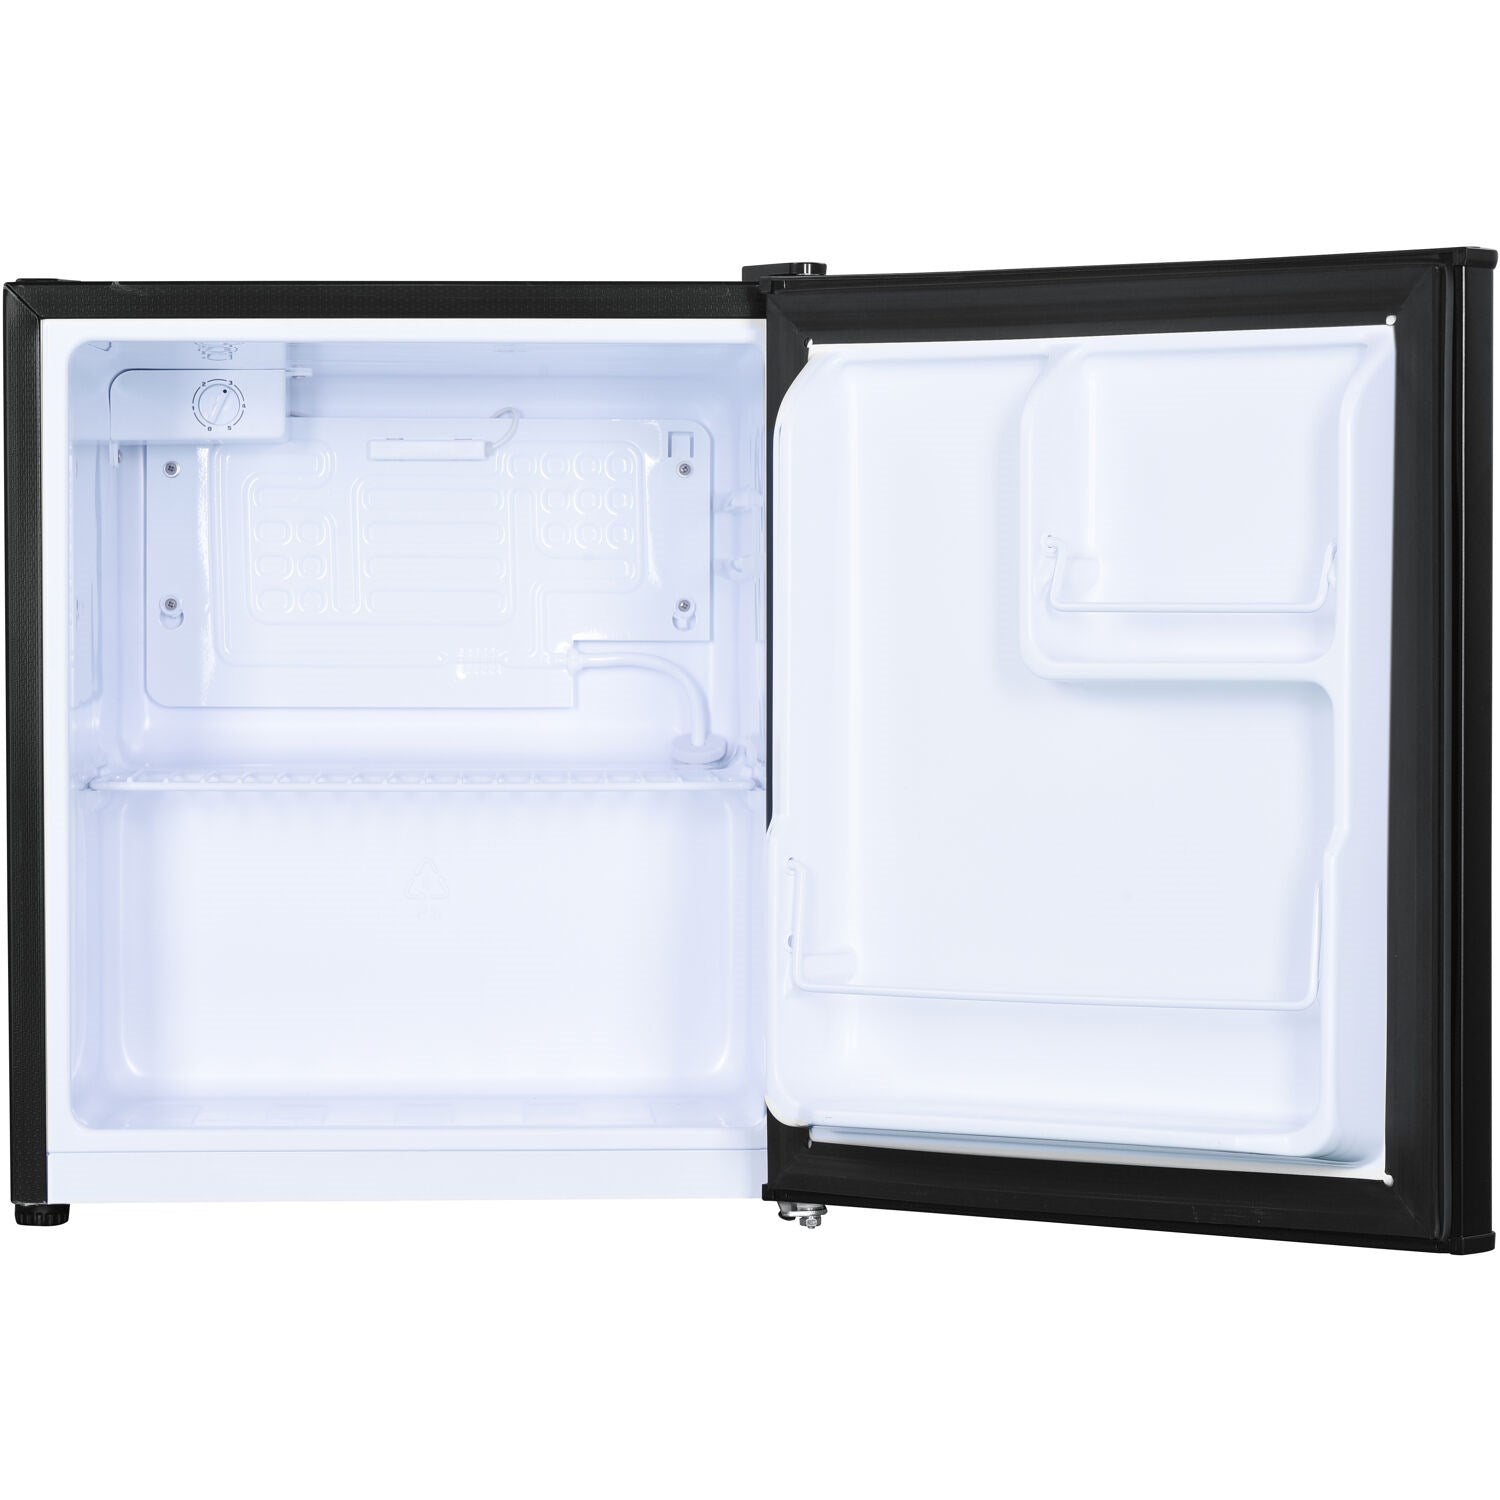 Danby - 1.6 CuFt. All Refrigerator, Auto Defrost, Wire Shelves, Energy Star